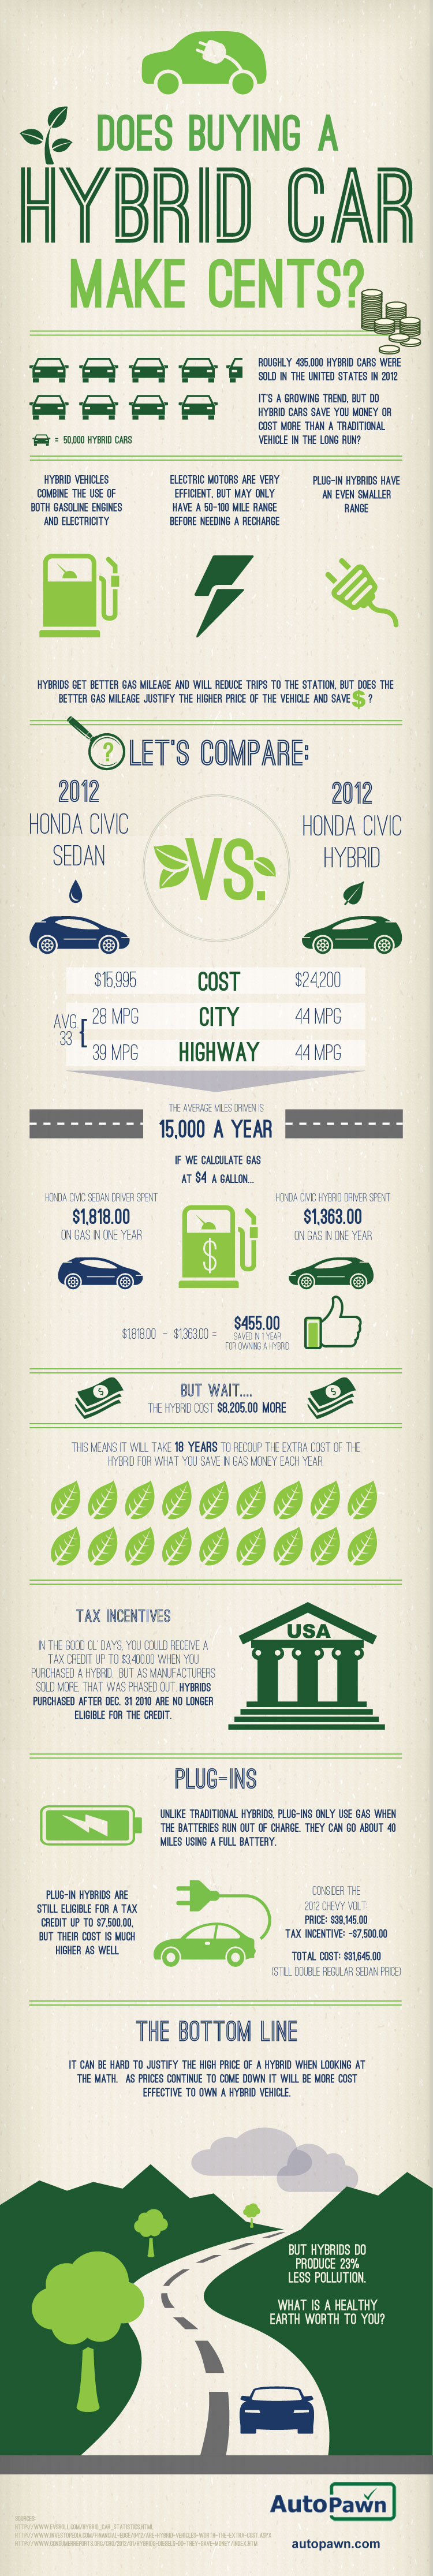 does-buying-a-hybrid-car-make-cents-visual-ly